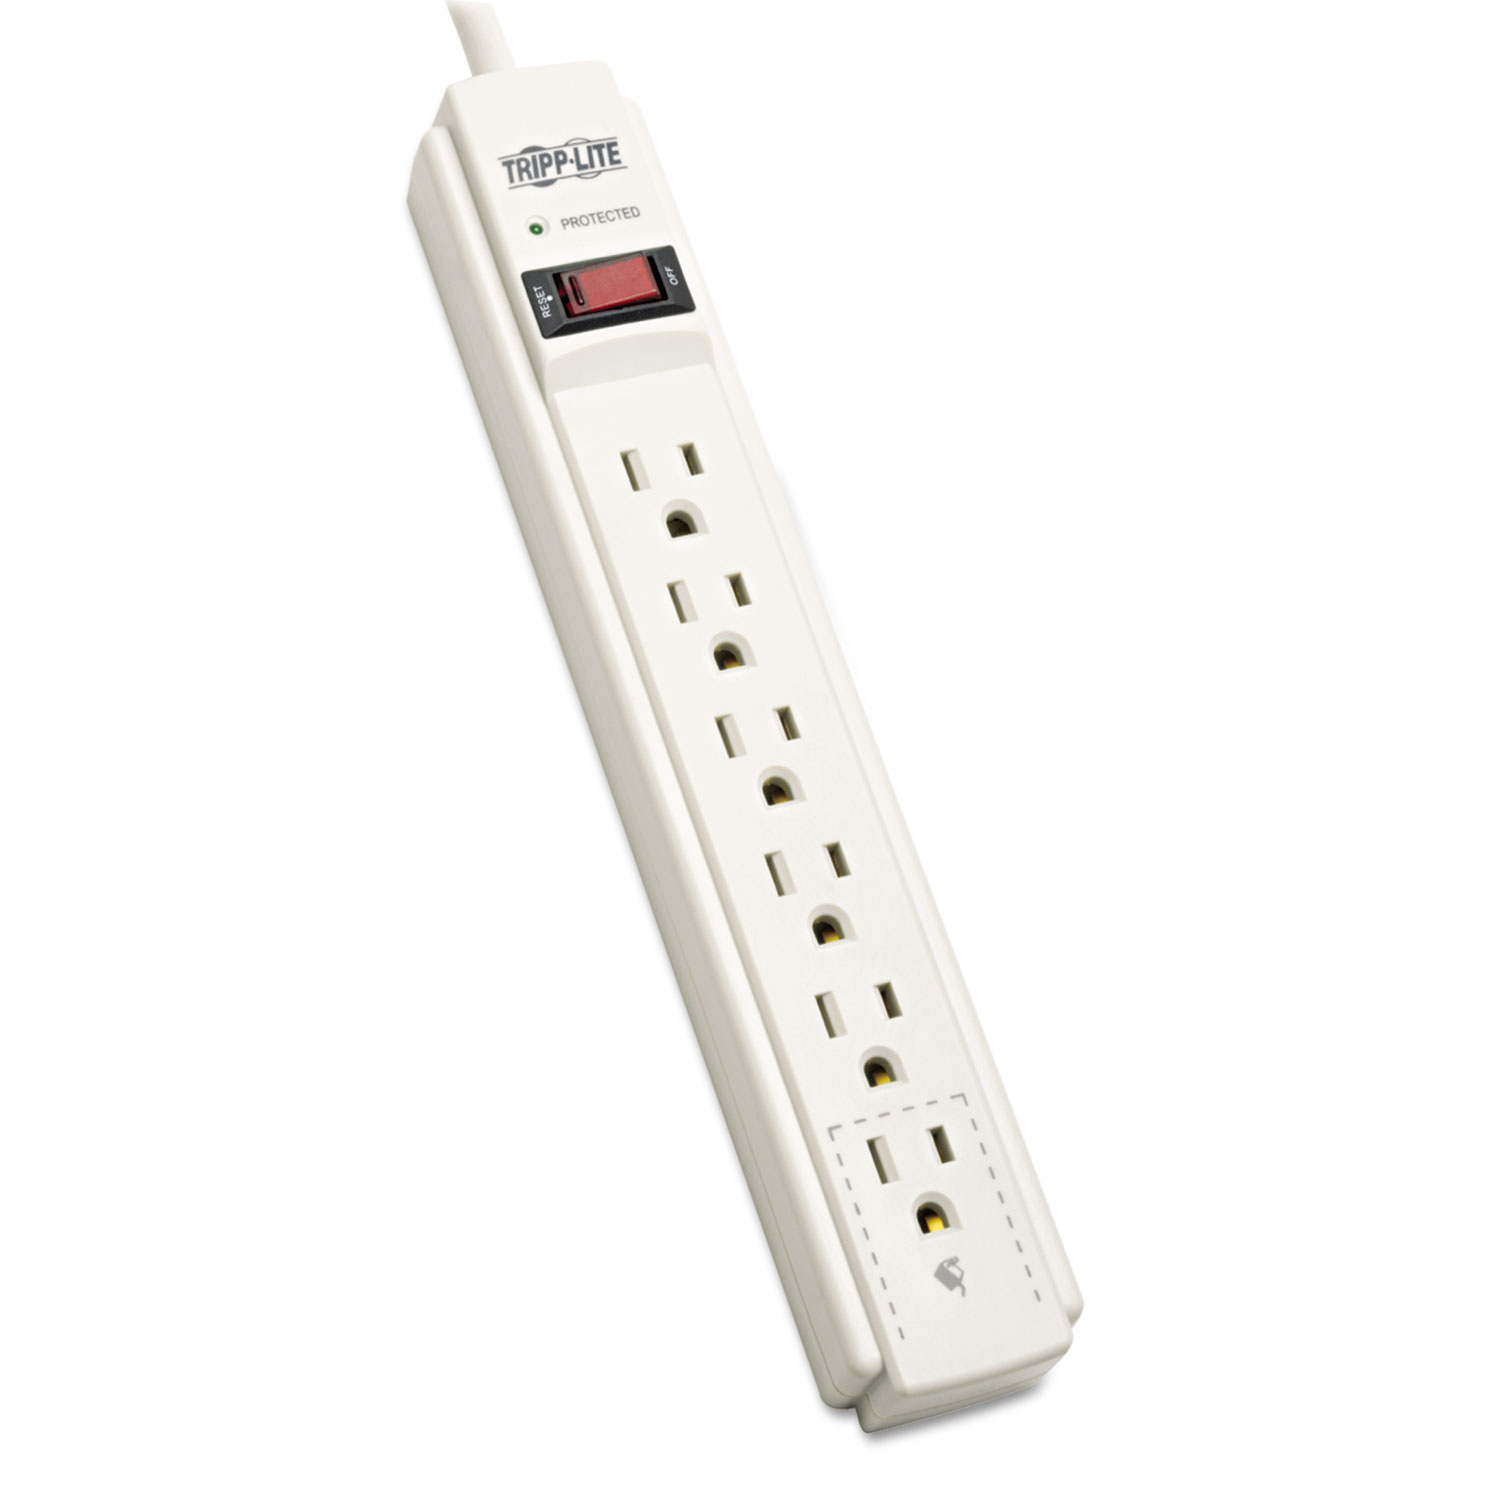  Tripp Lite TLP606TAA Protect It! Surge Protector, 6 Outlets, 6 ft. Cord, 790 Joules, TAA-Compliant (TRPTLP606TAA) 